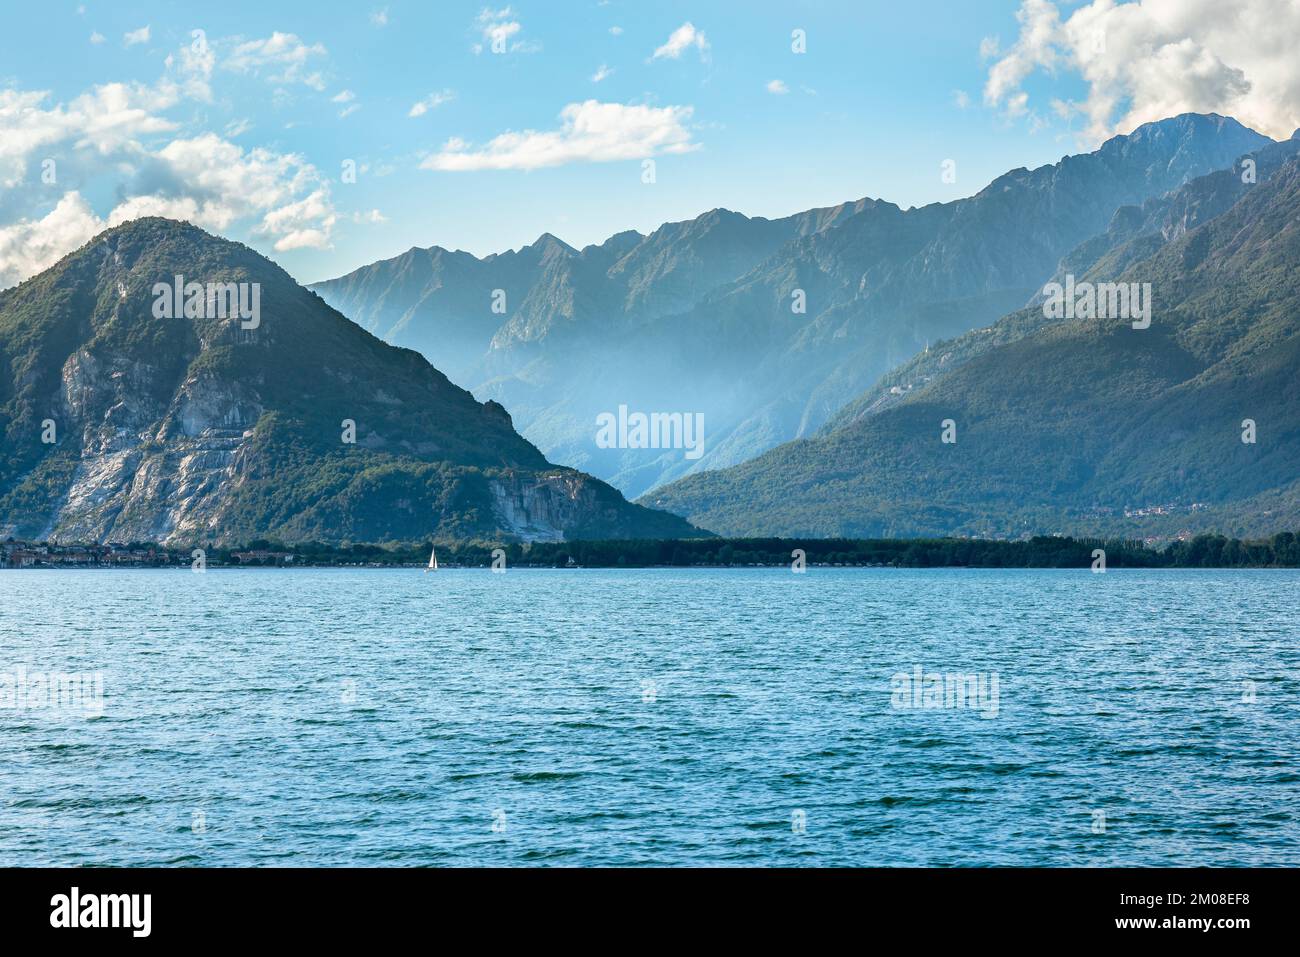 Lake Maggiore Italy, view in summer of the rugged mountain landscape sweeping down to the shore of Lake Maggiore, Piedmont, Italy Stock Photo